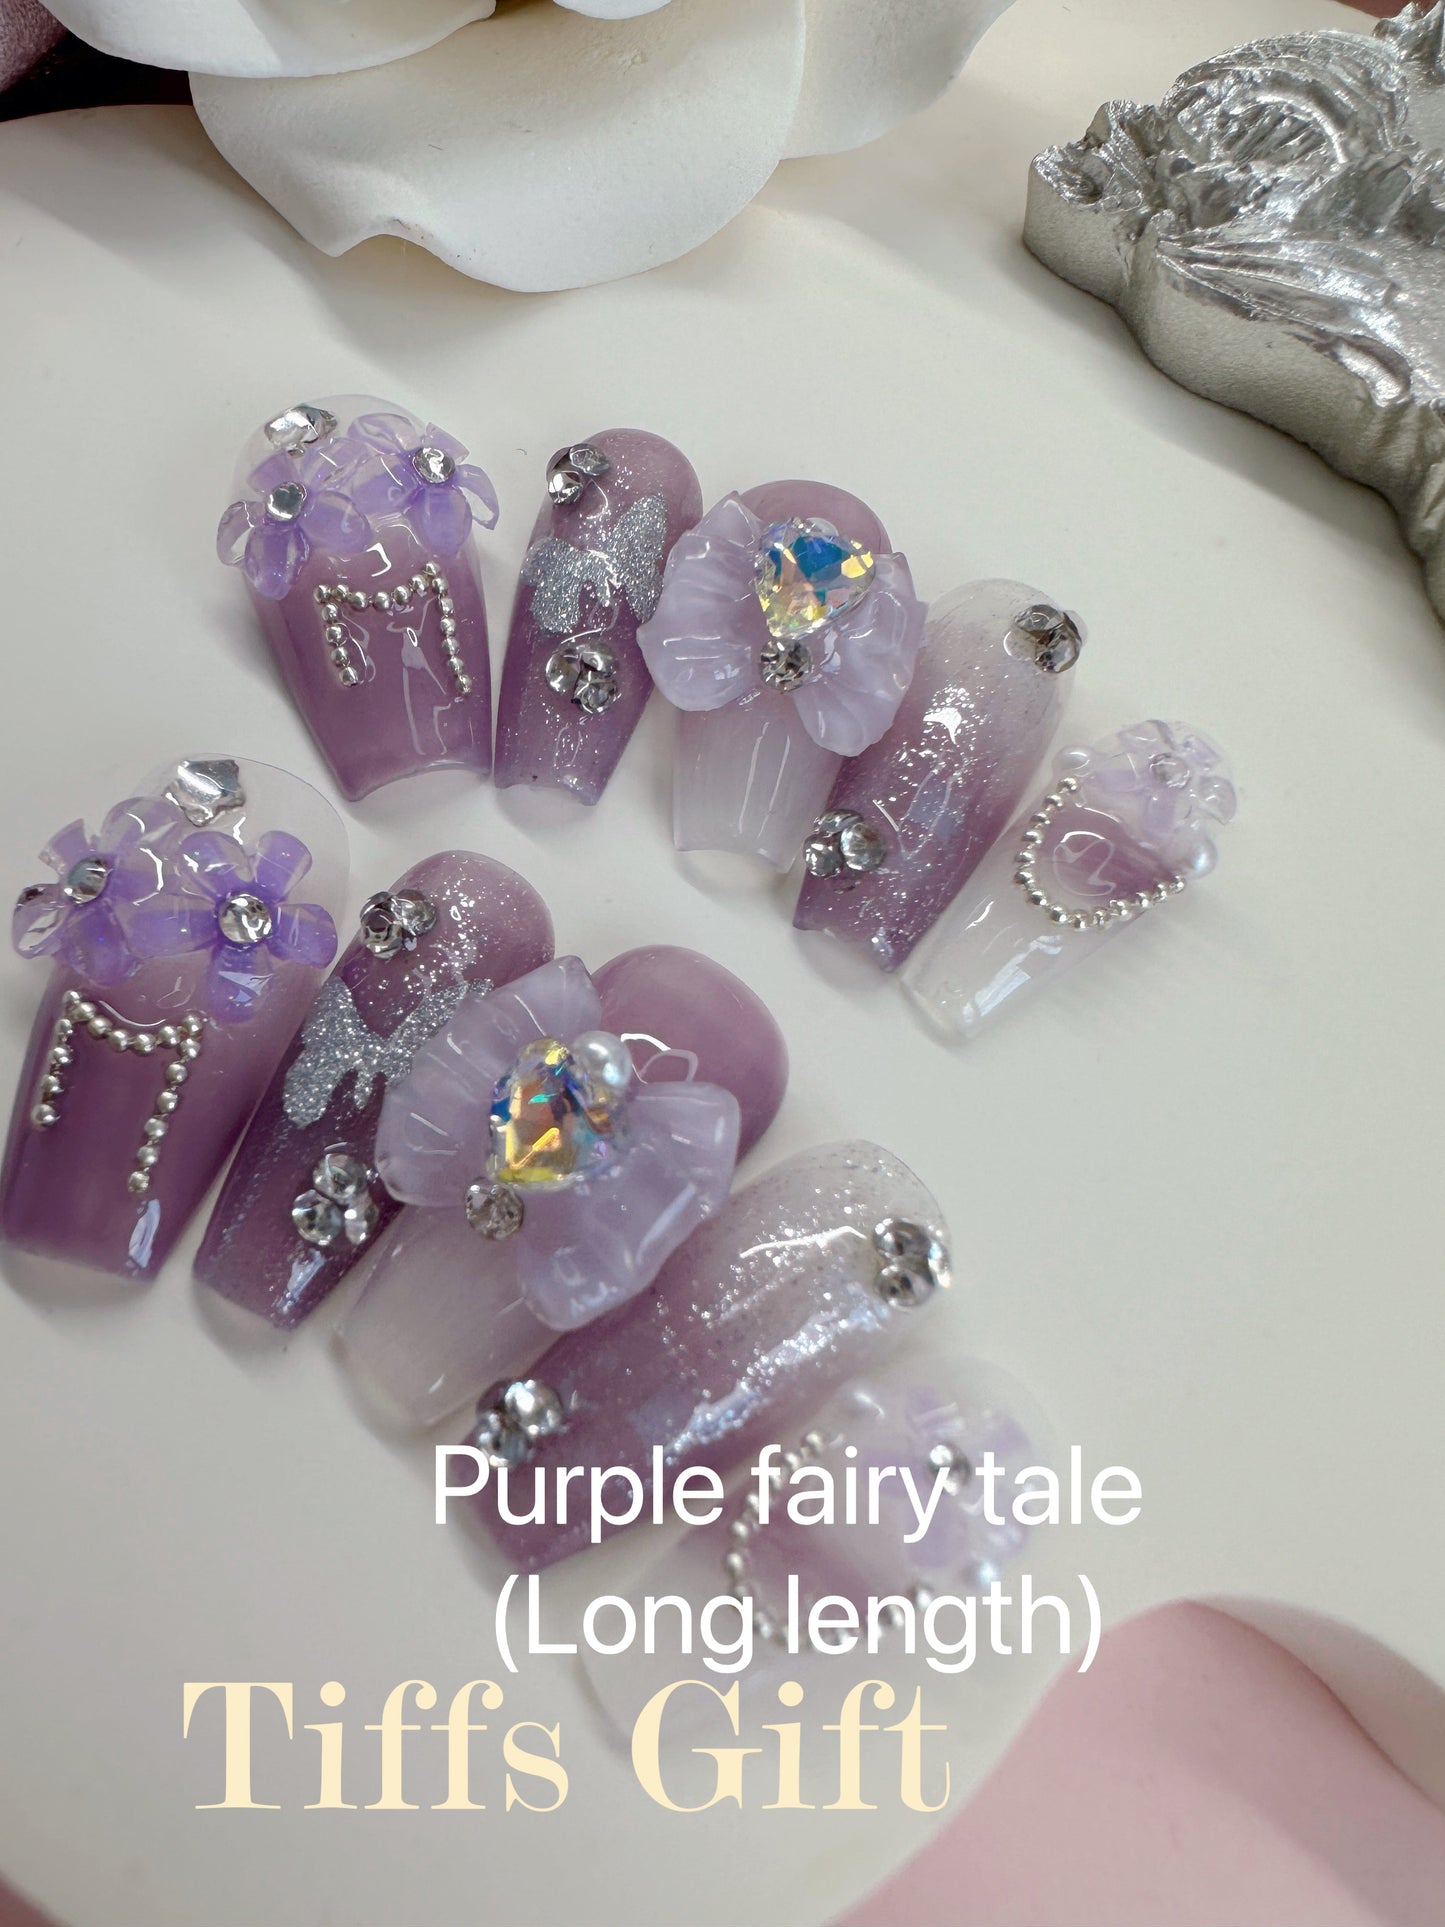 Purple fairy tale (long) Reusable Hand Made Press On Nails - TiffsGift